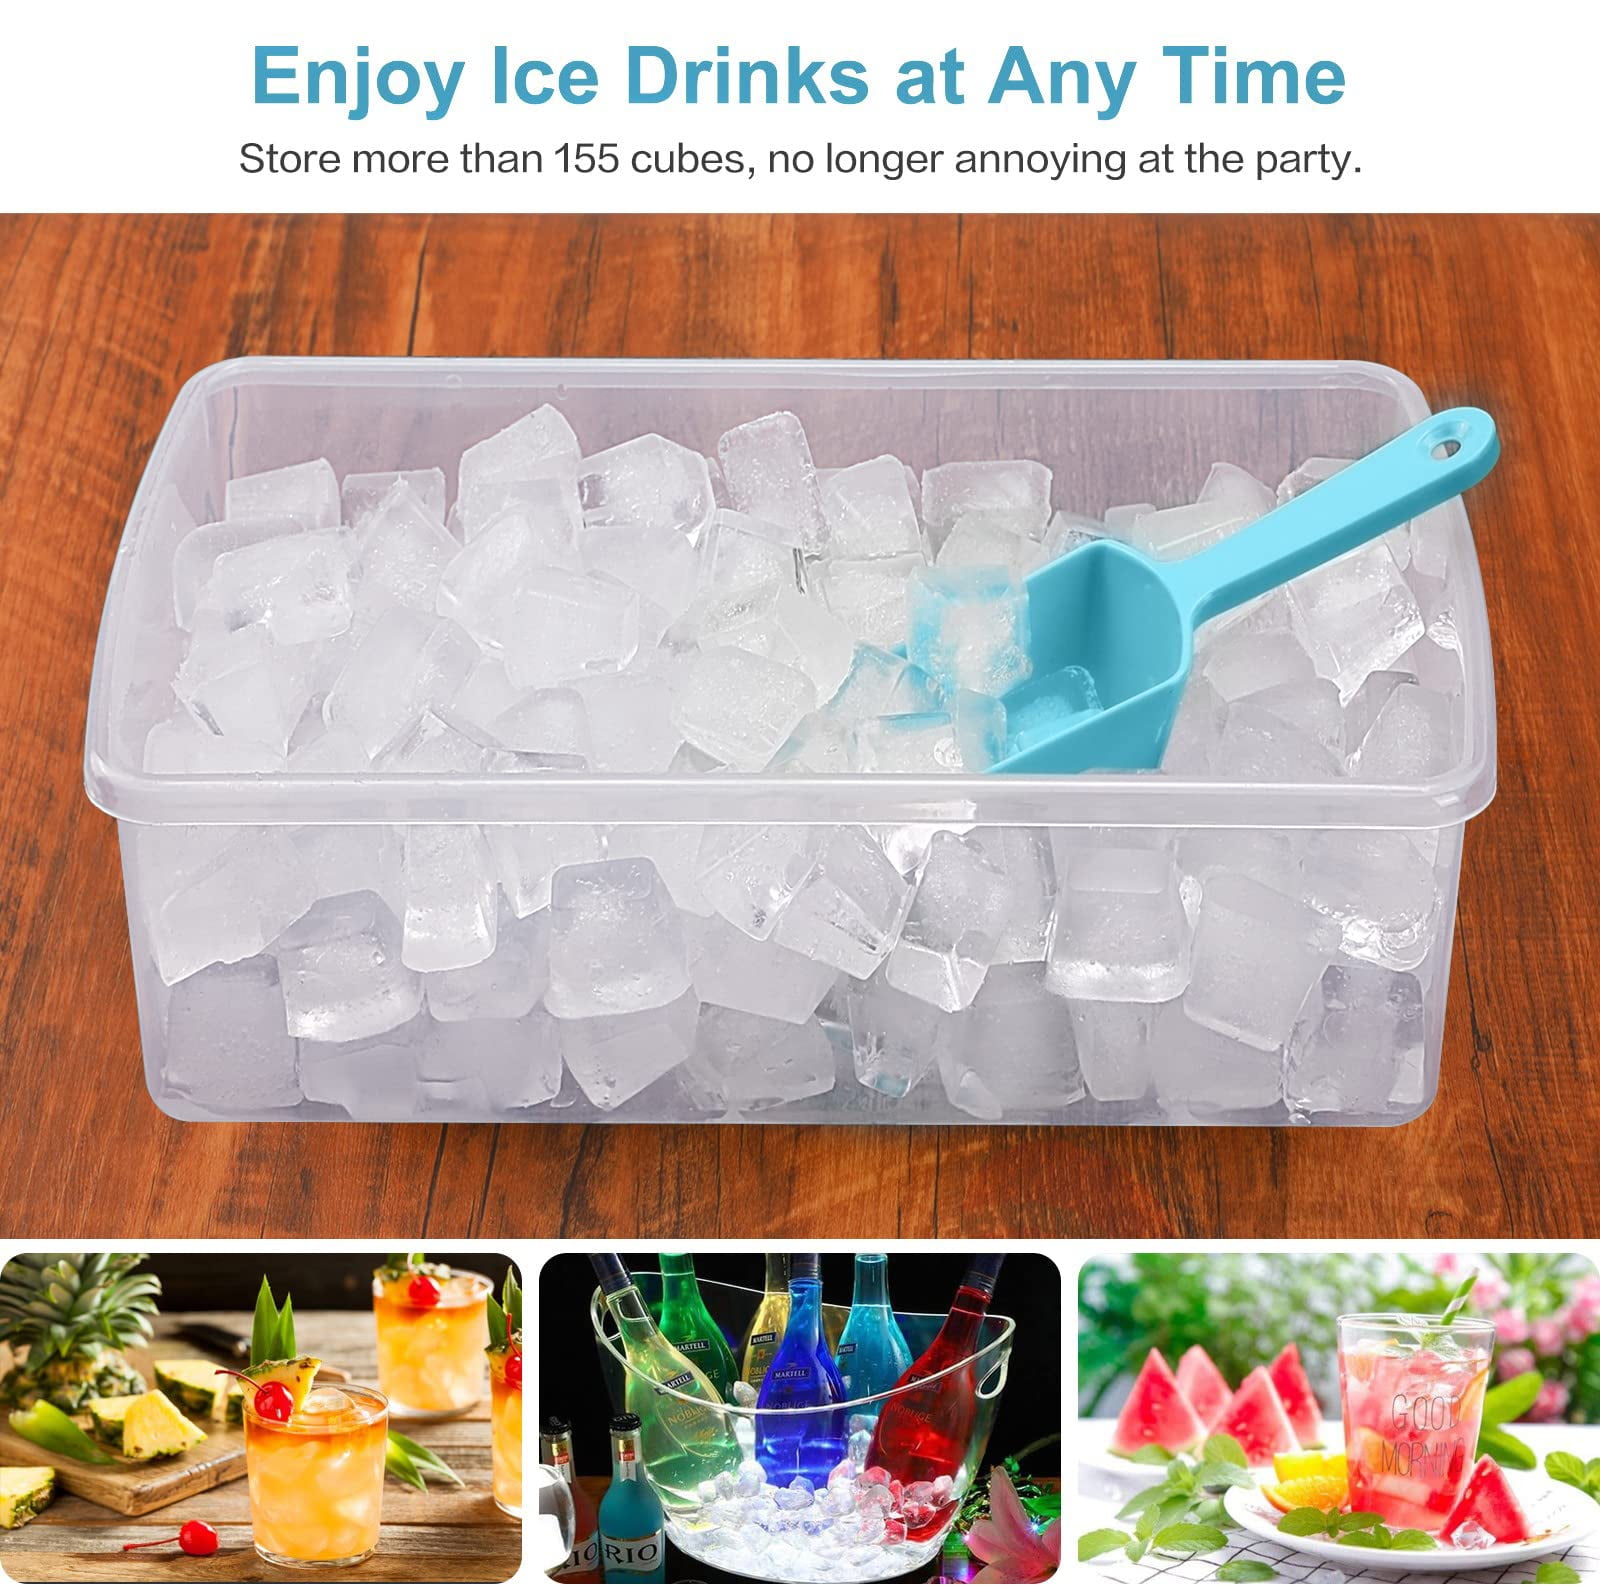 Would You Use A Stainless Steel Ice Cube Tray? » My Plastic-free Life